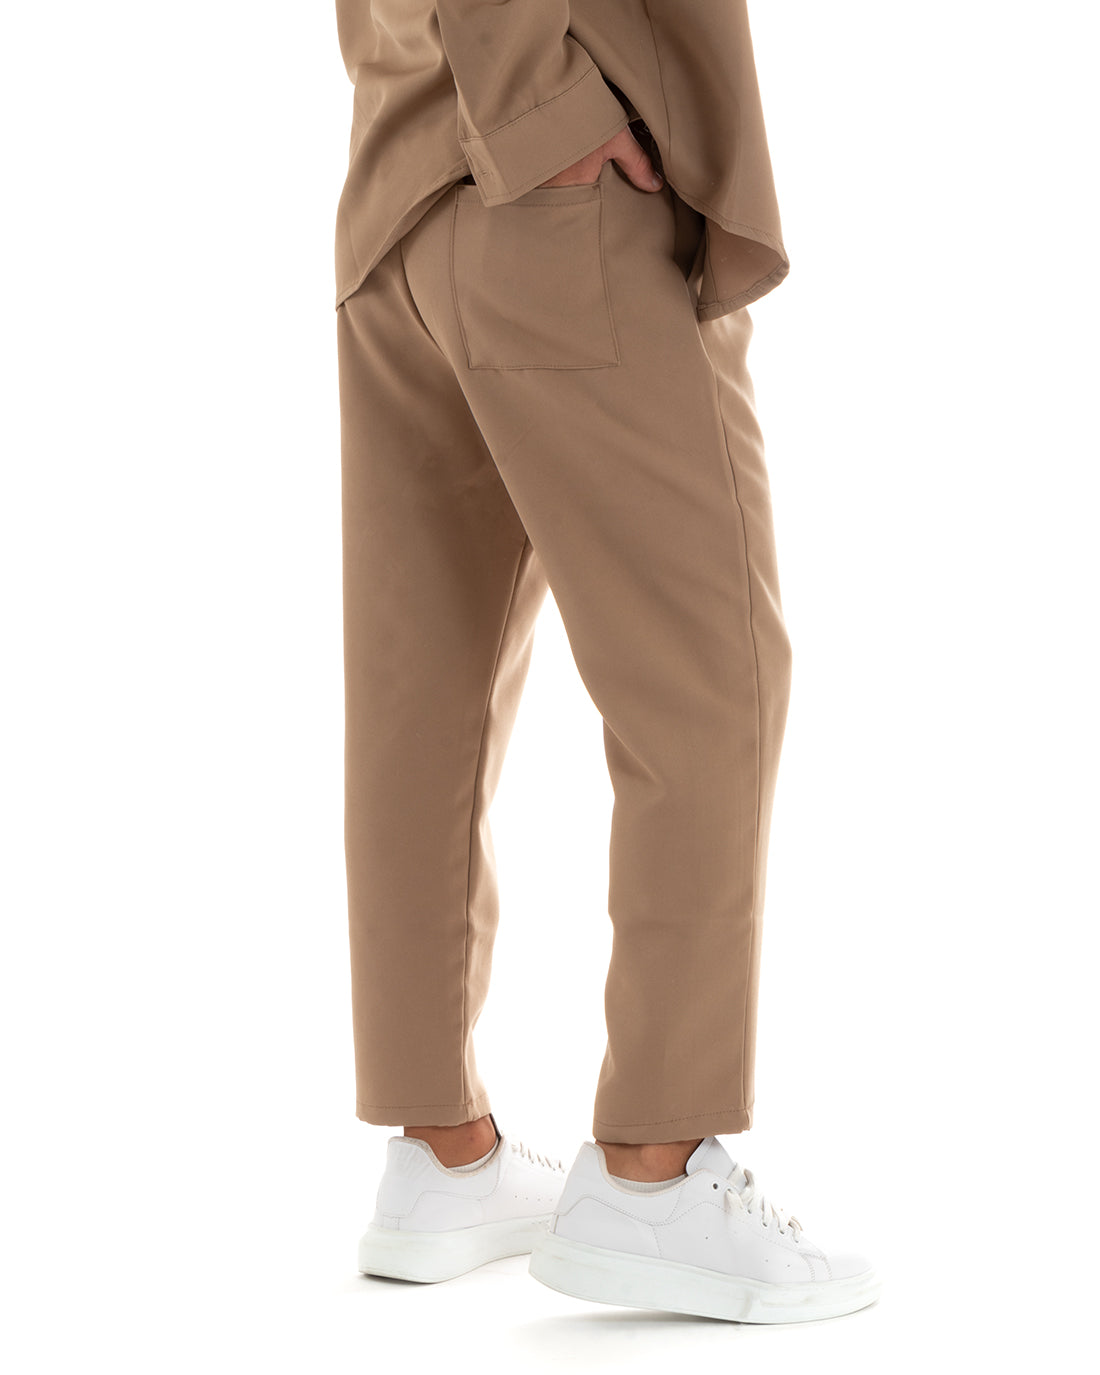 Complete Coordinated Set for Men Viscose Shirt With Collar Trousers Outfit Camel GIOSAL-OU2386A